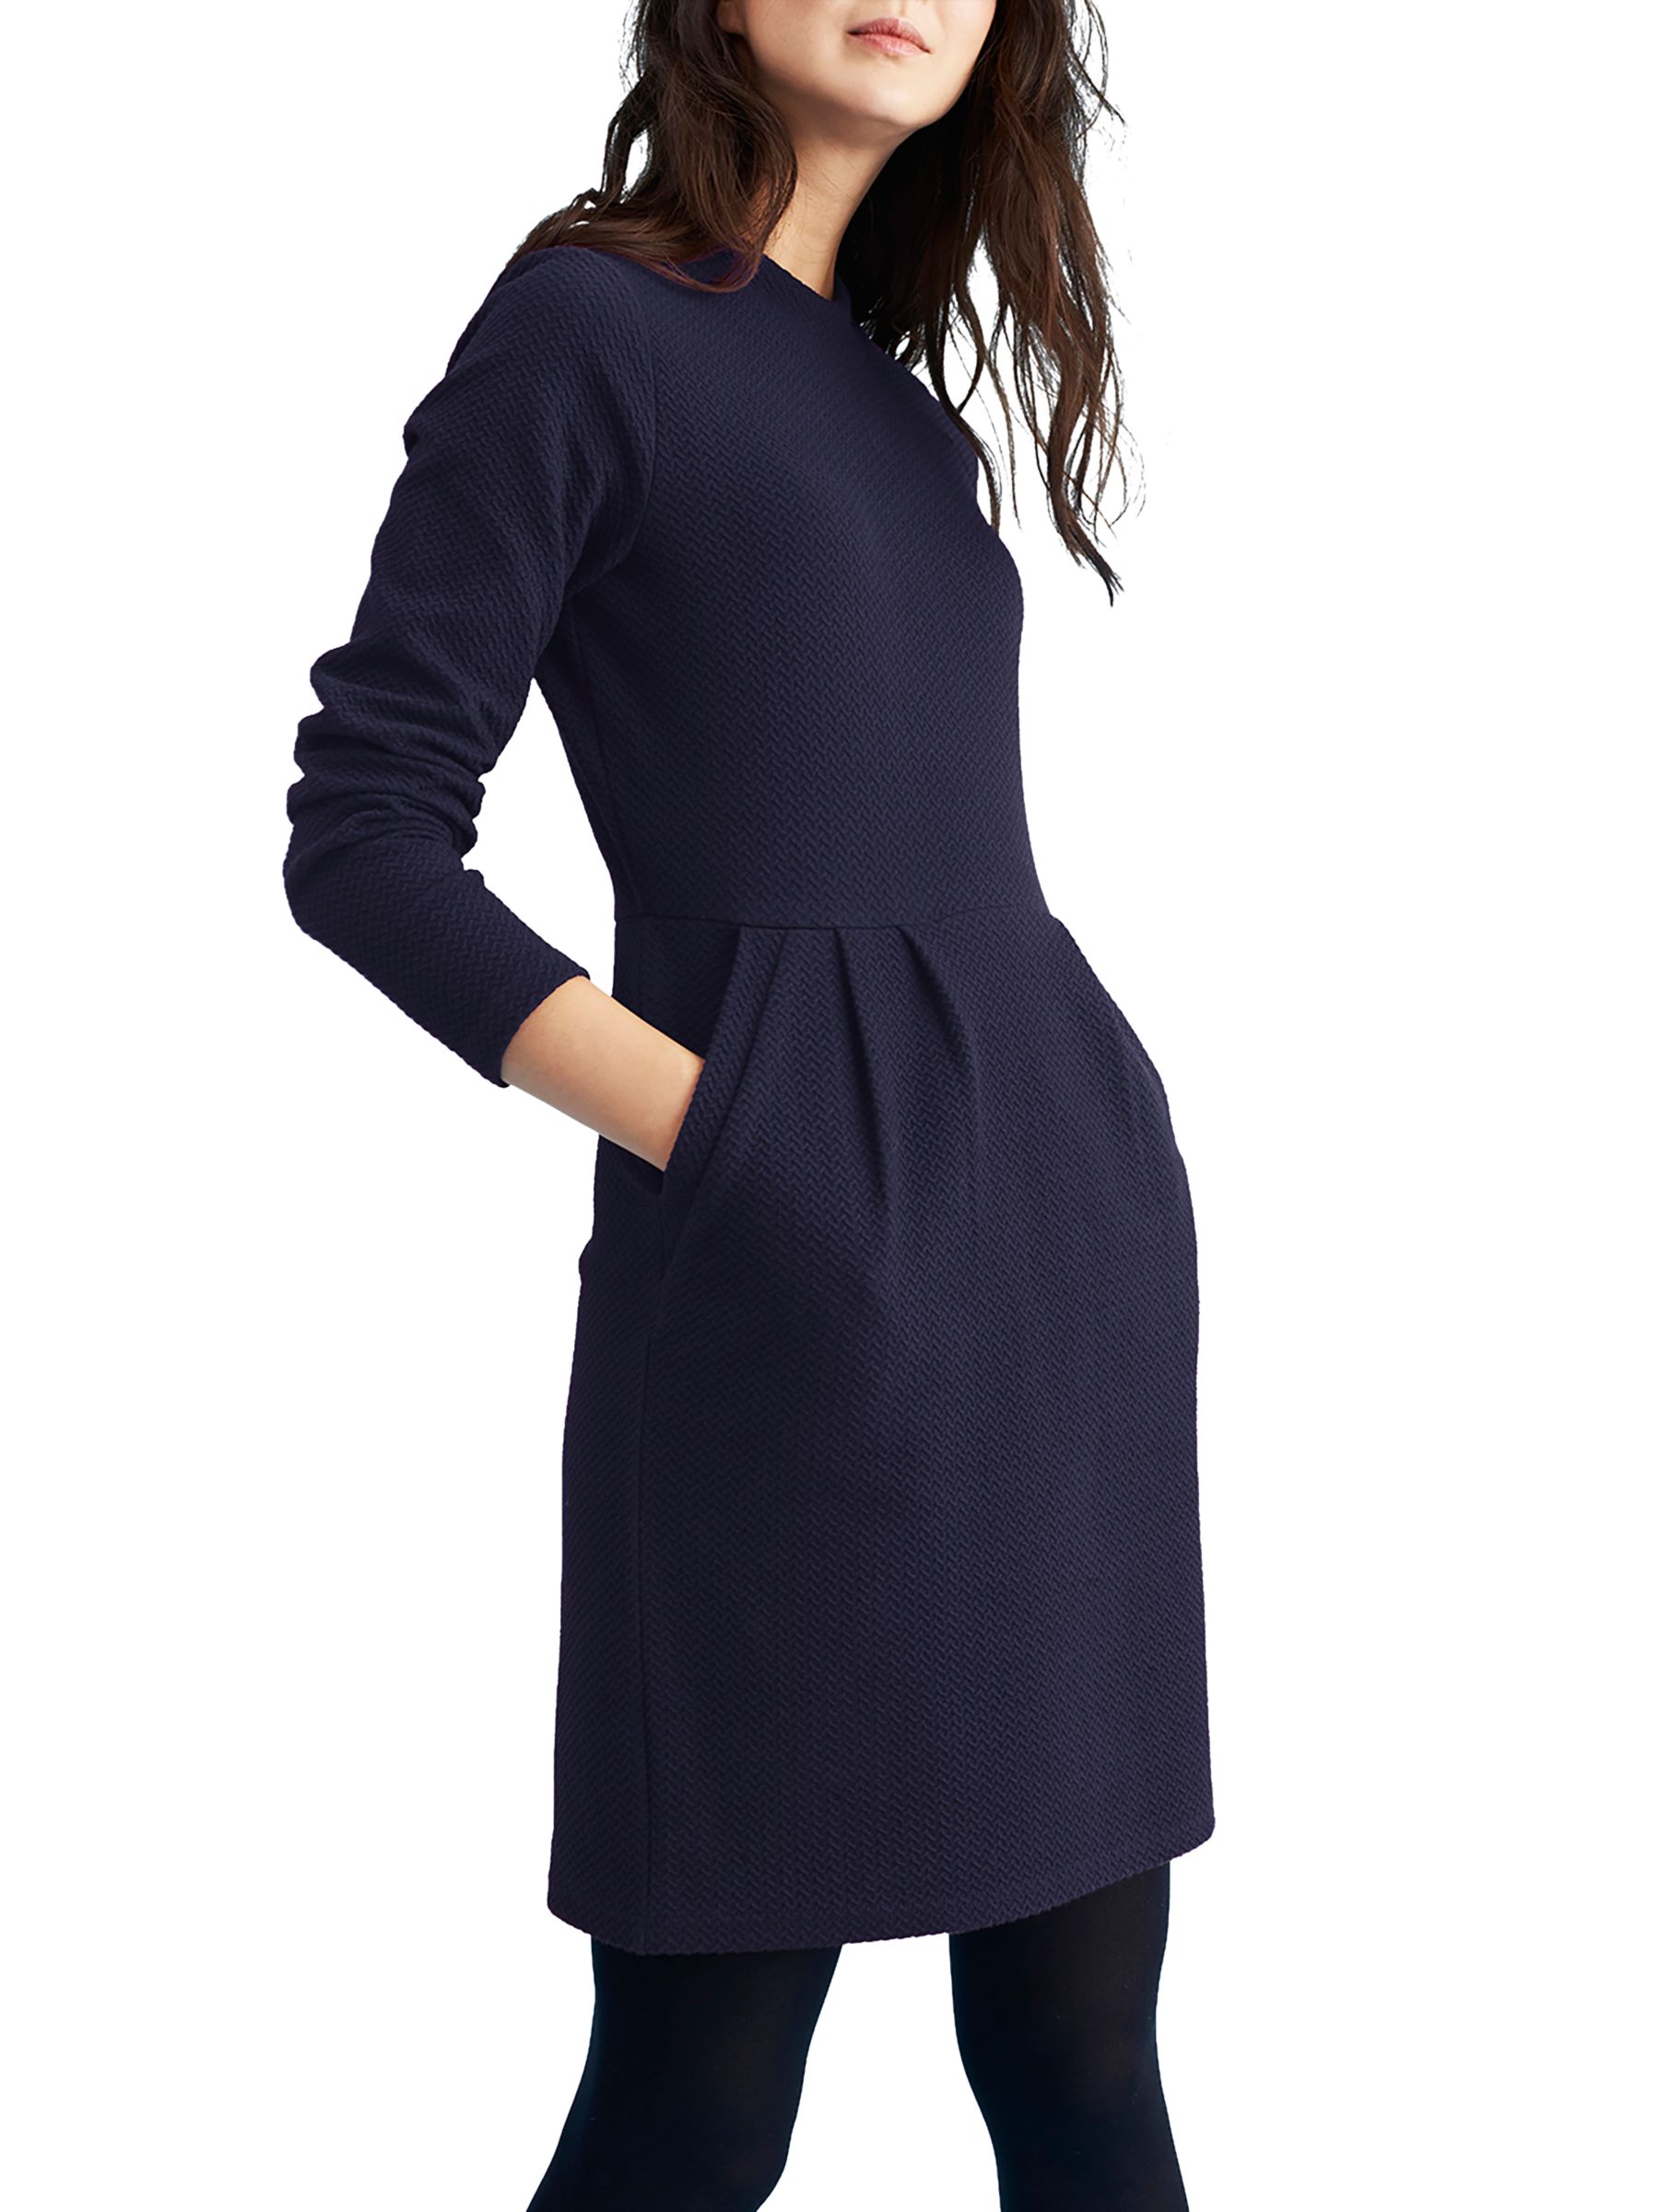 Joules Patricia High Neck Dress at John Lewis & Partners